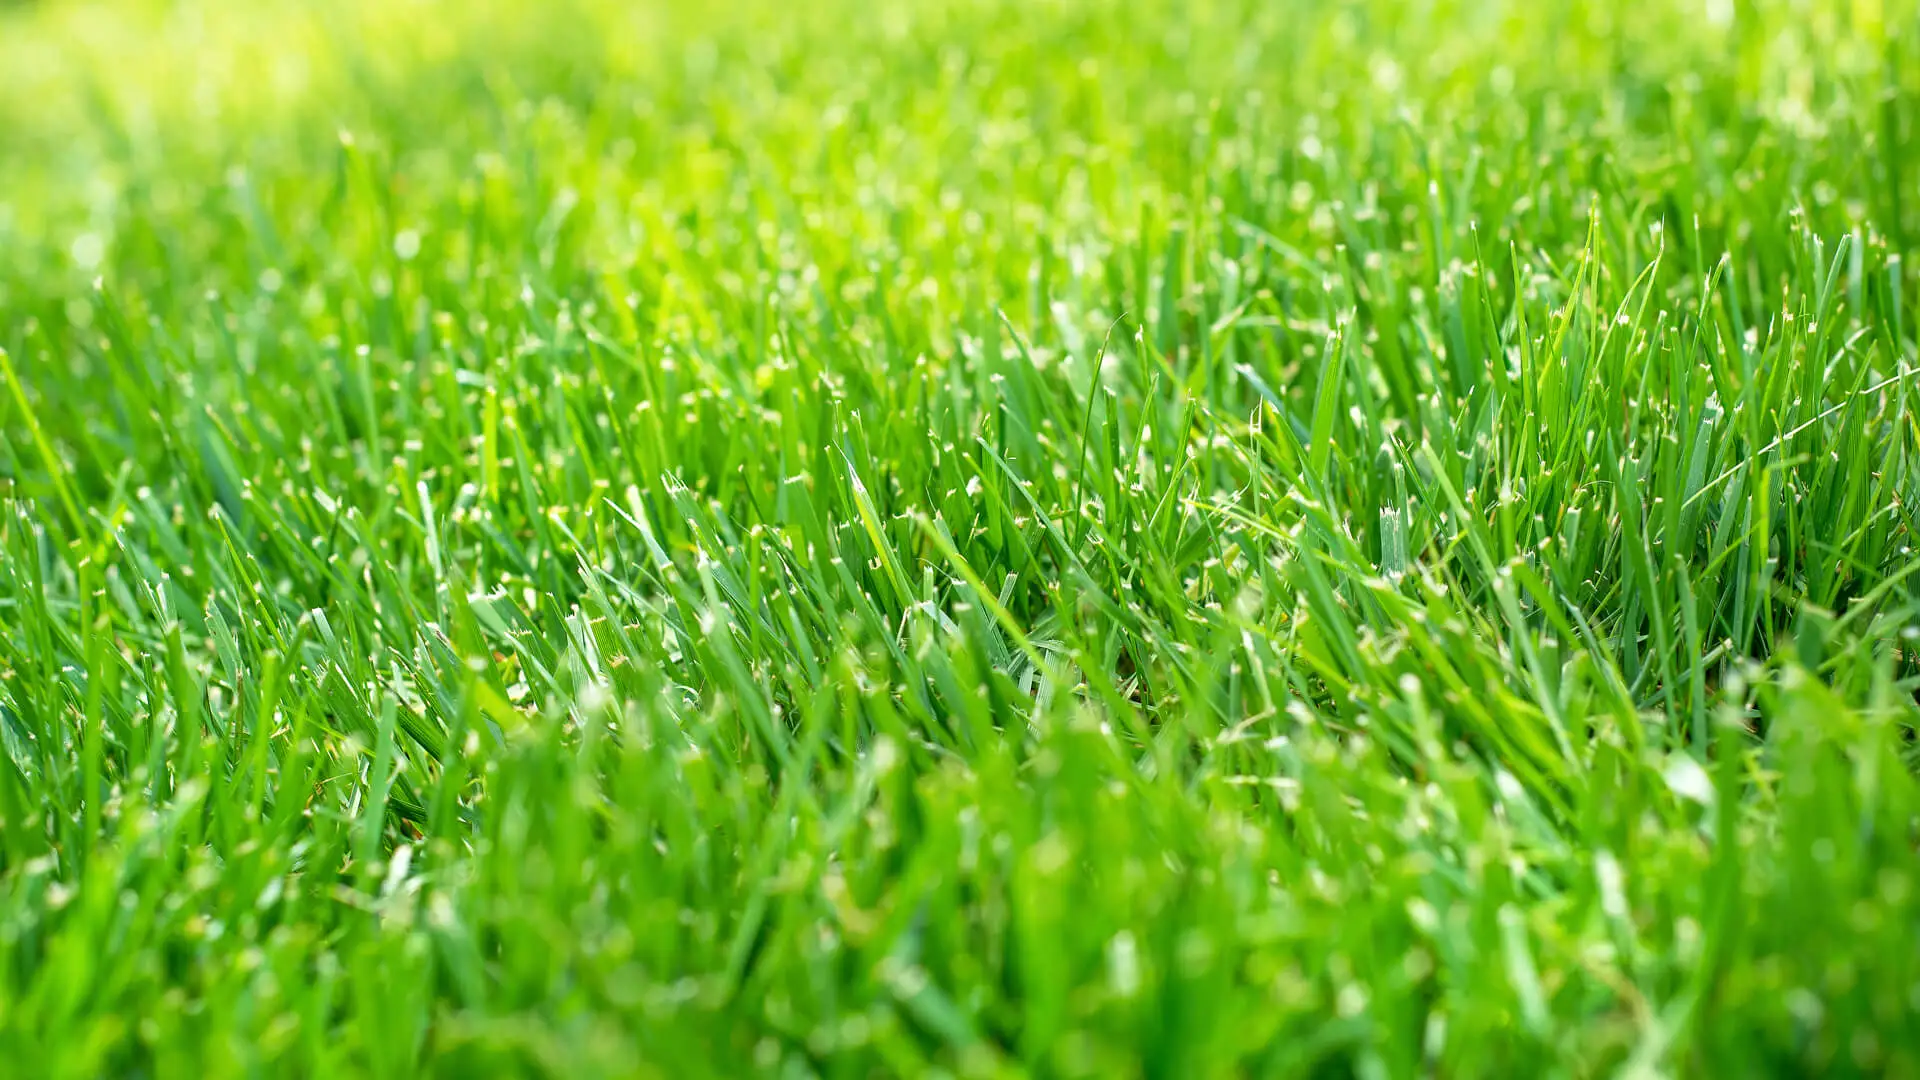 How to Maintain Your Green Lawn This Summer